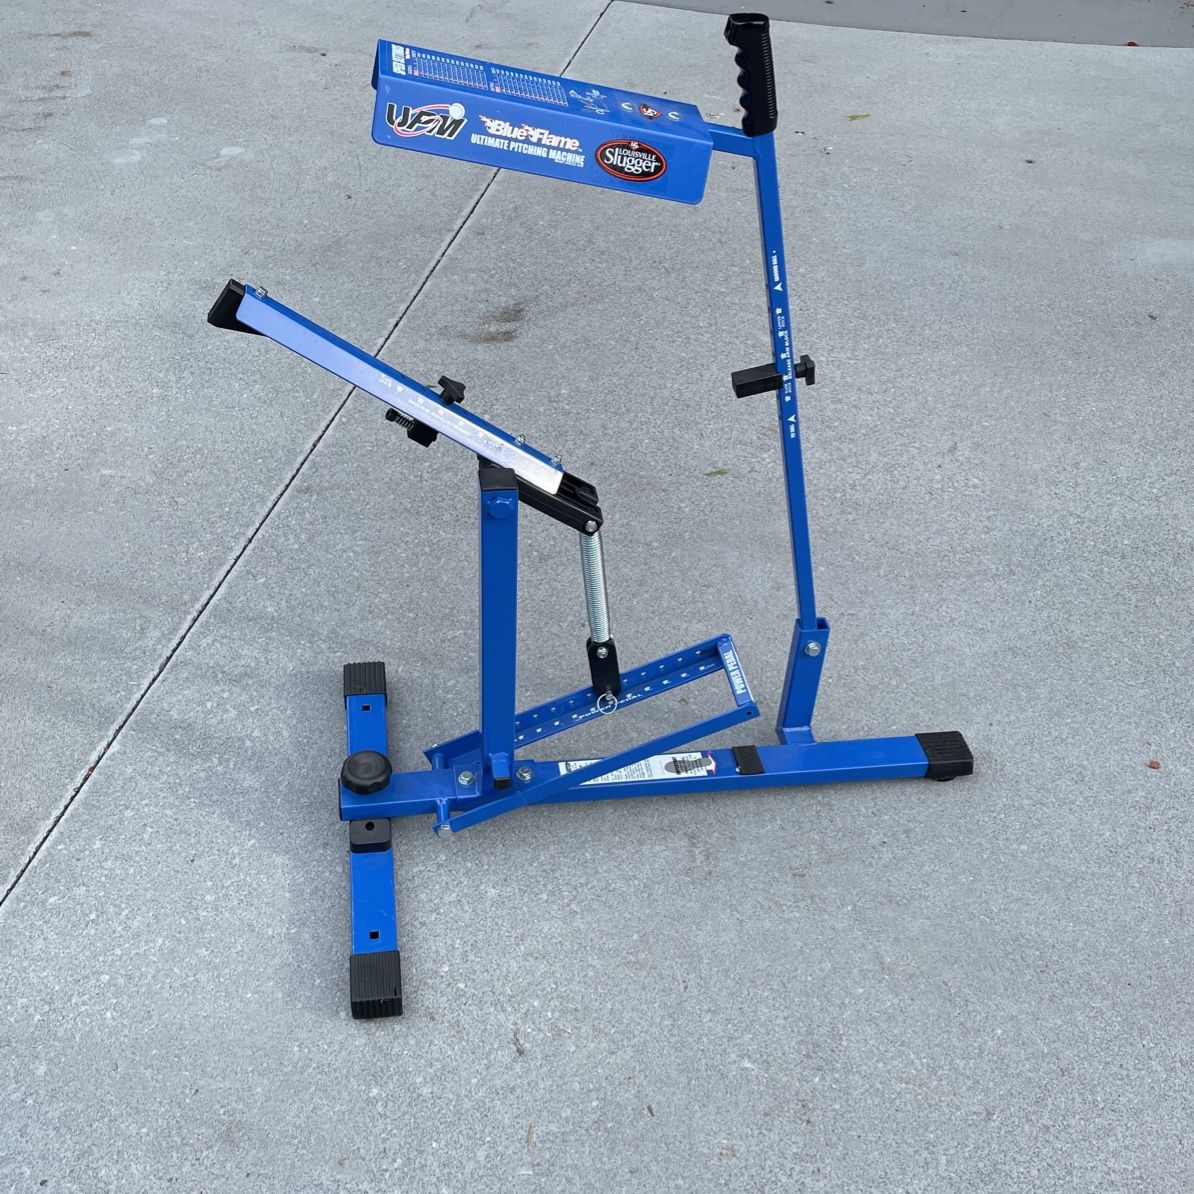 Louisville Slugger Blue Flame Ultimate Baseball Pitching Machine for Sale  in Kirkland, WA - OfferUp